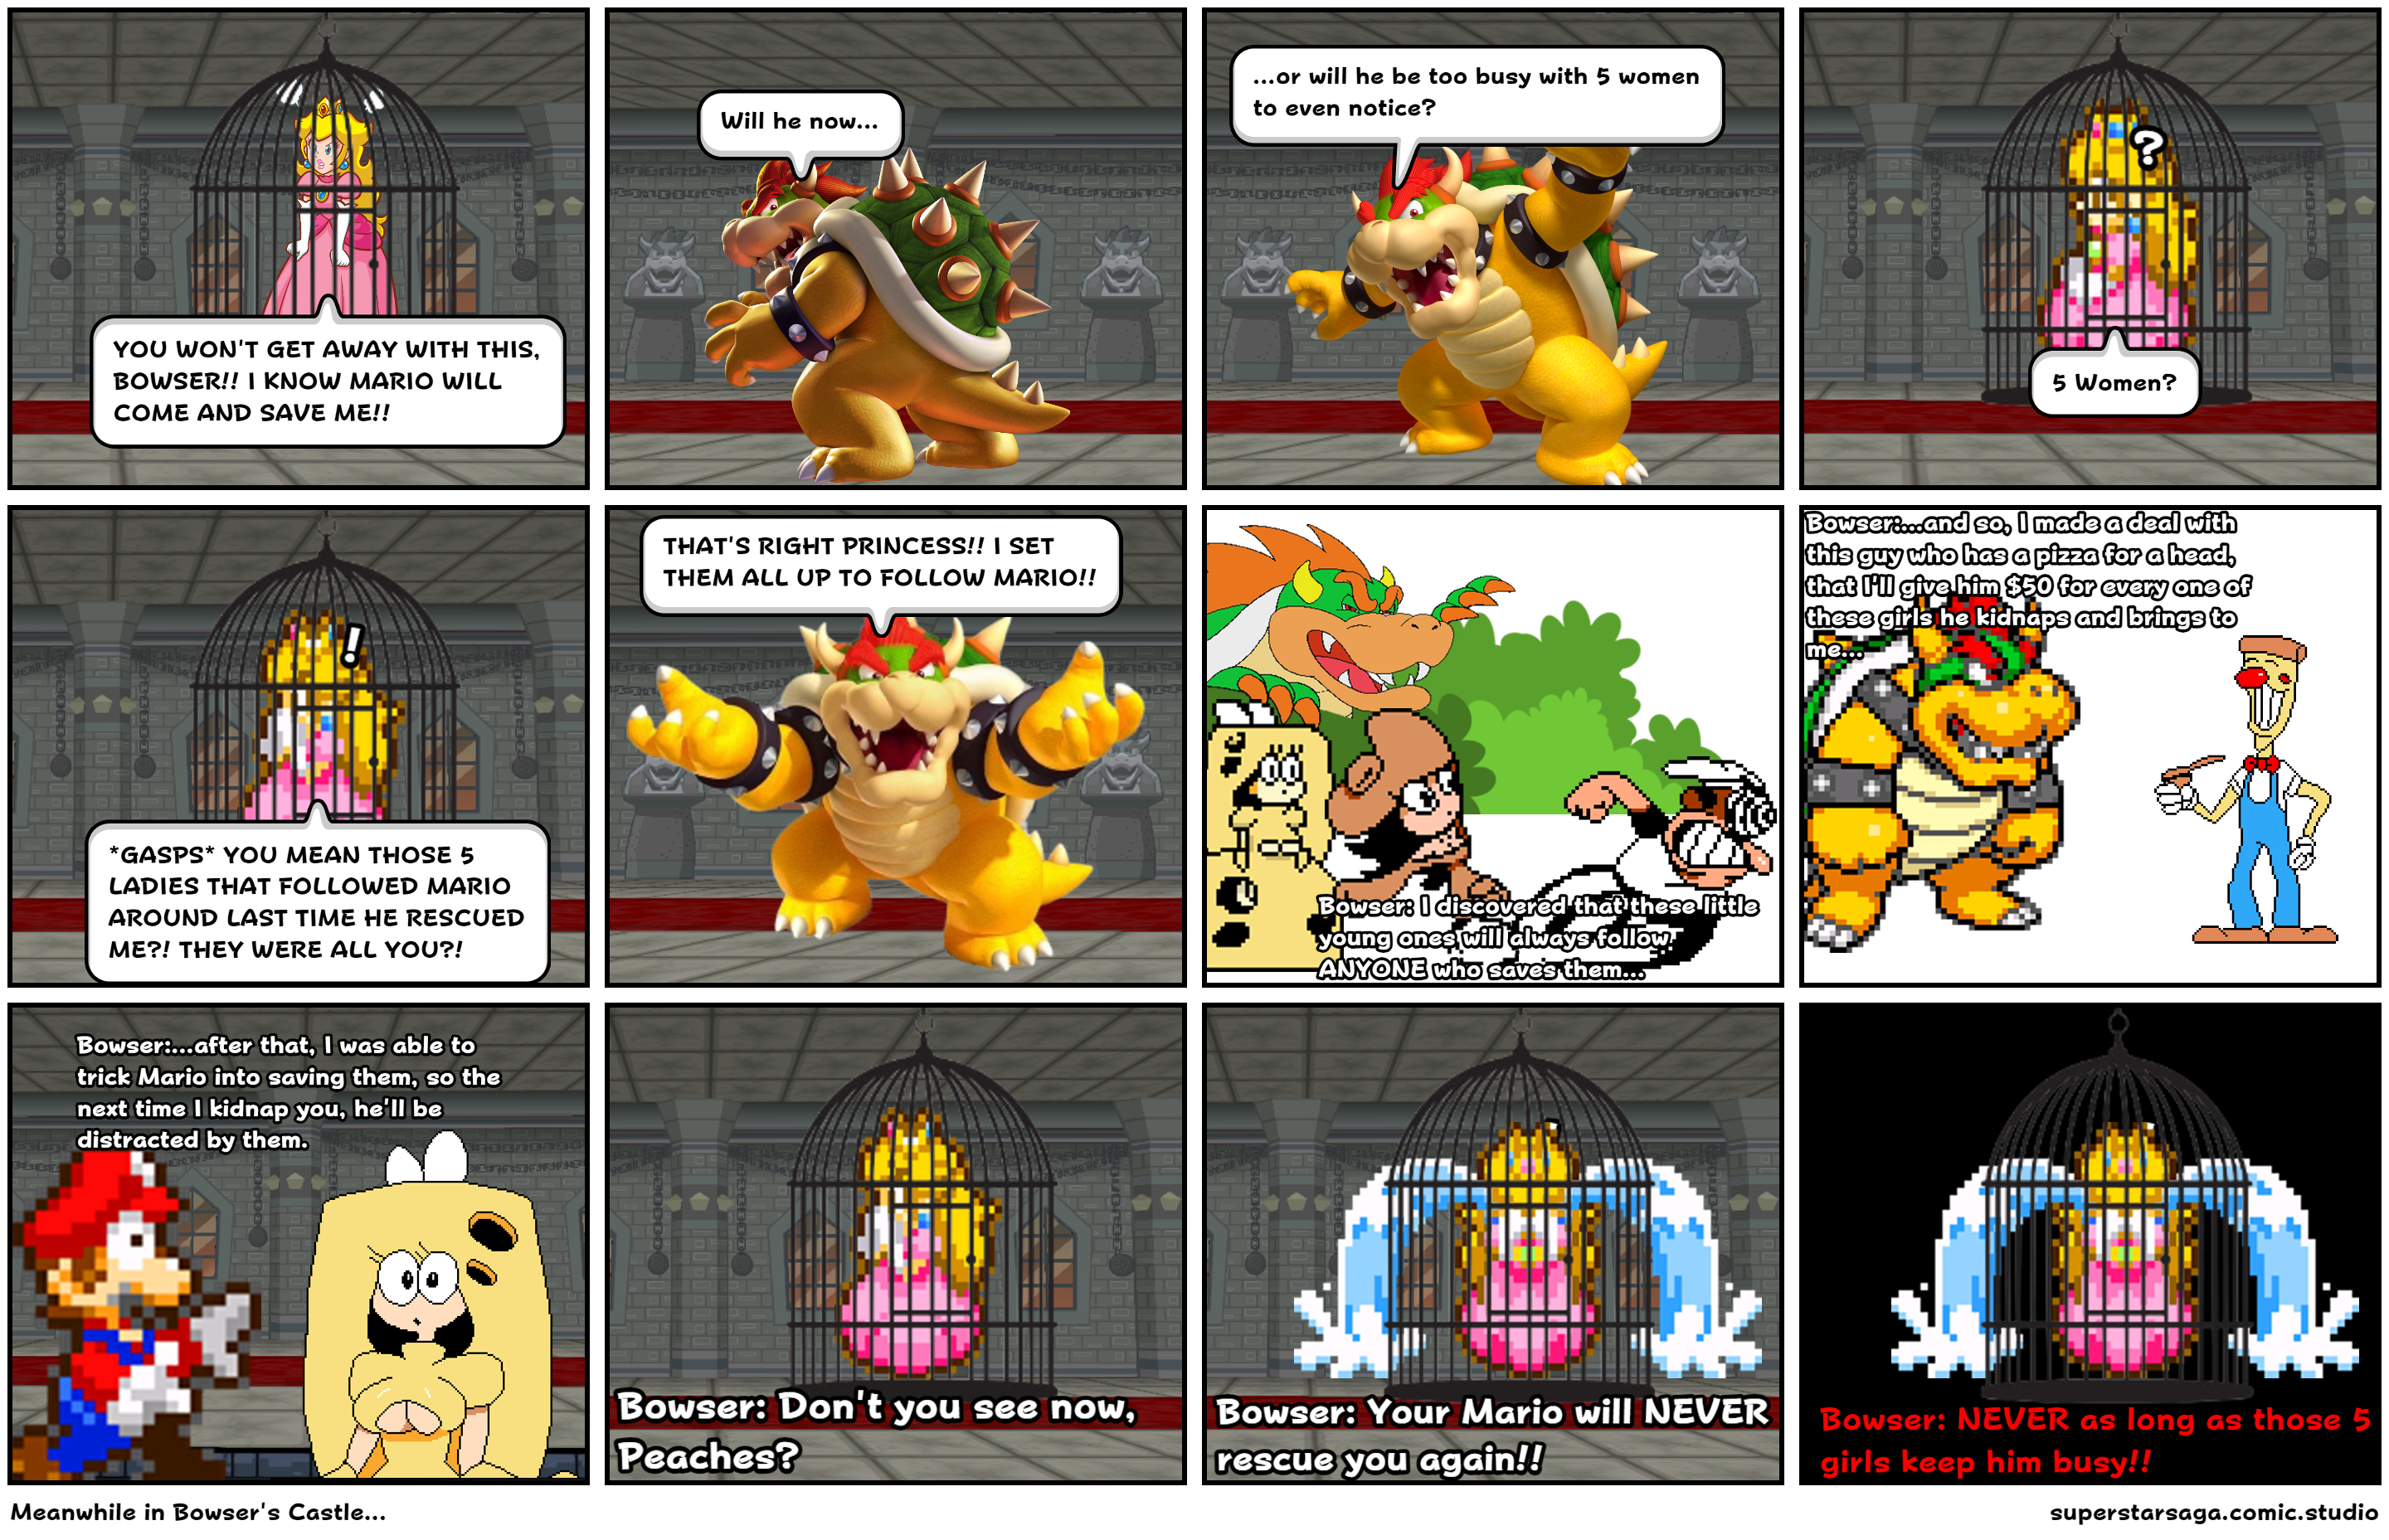 Meanwhile in Bowser's Castle...